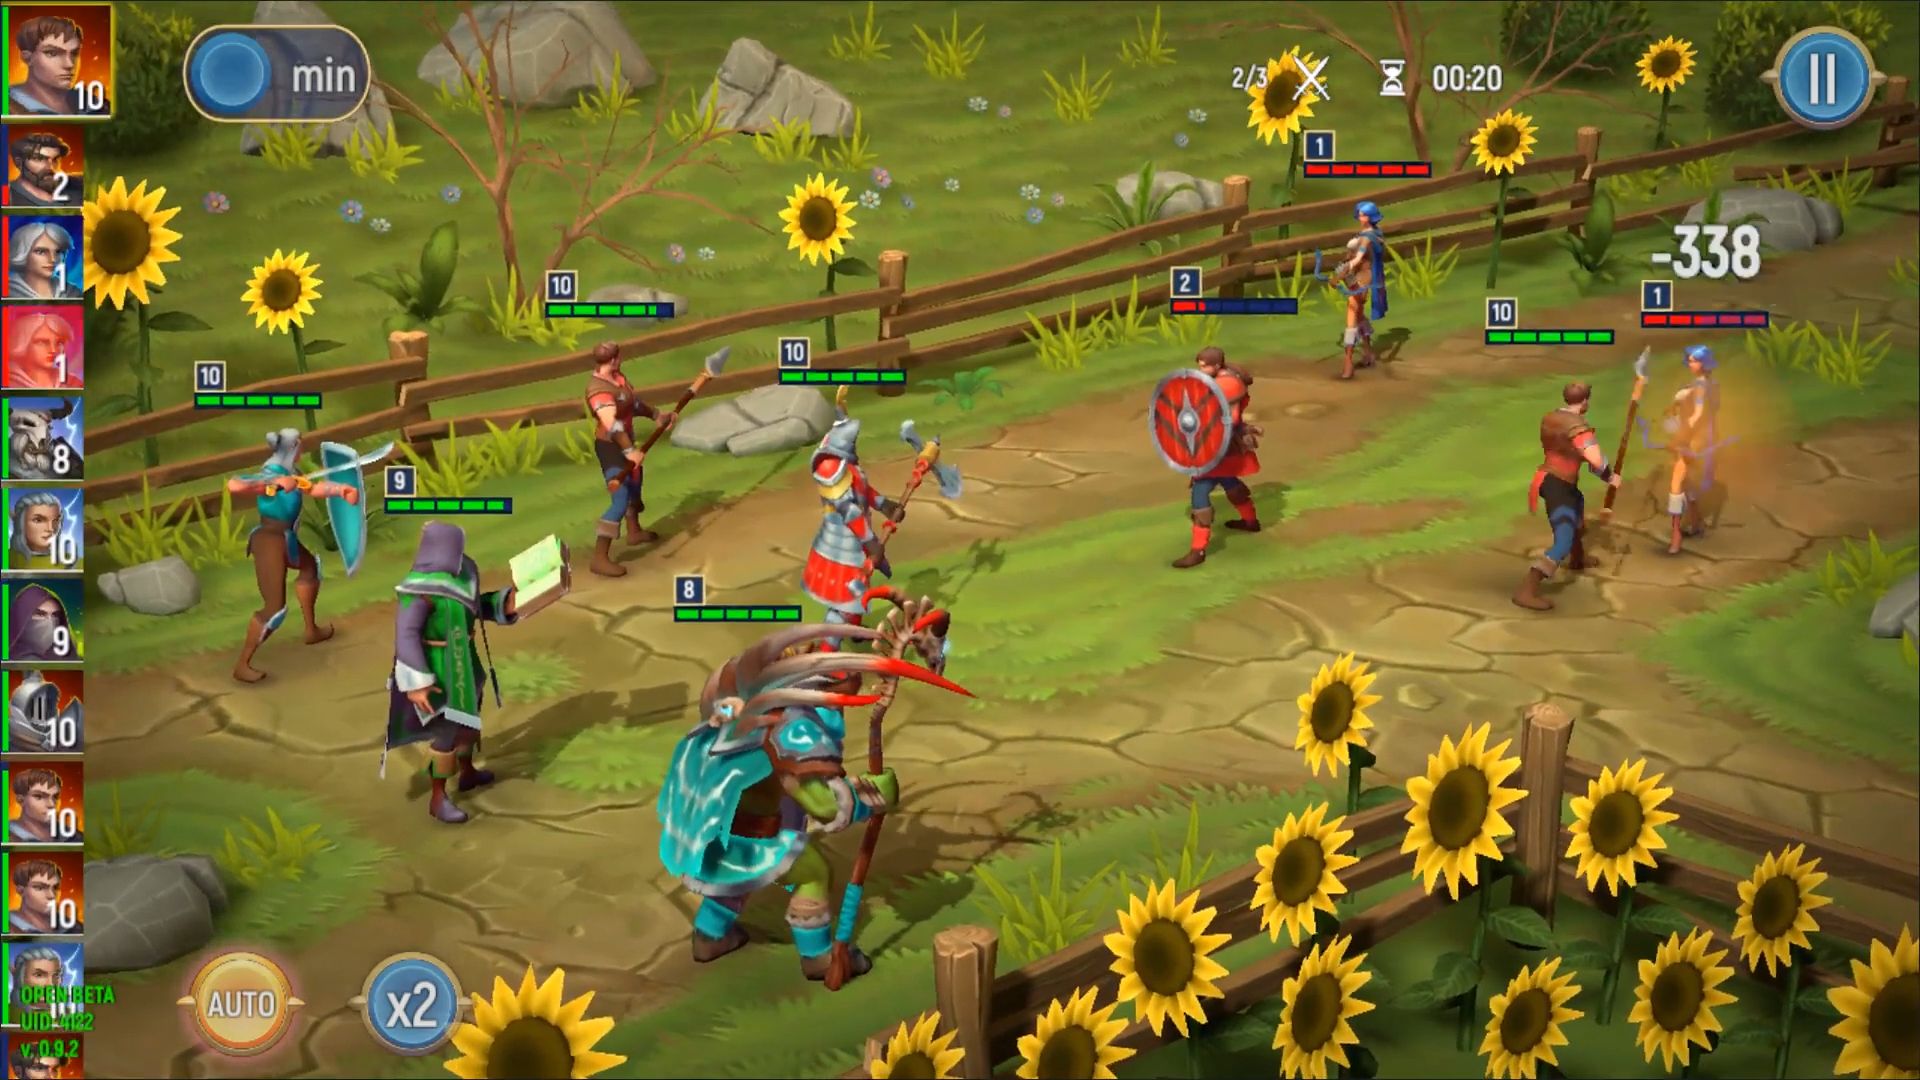 Warlords: Turn Based RPG Games PVP & Role Playing for Android